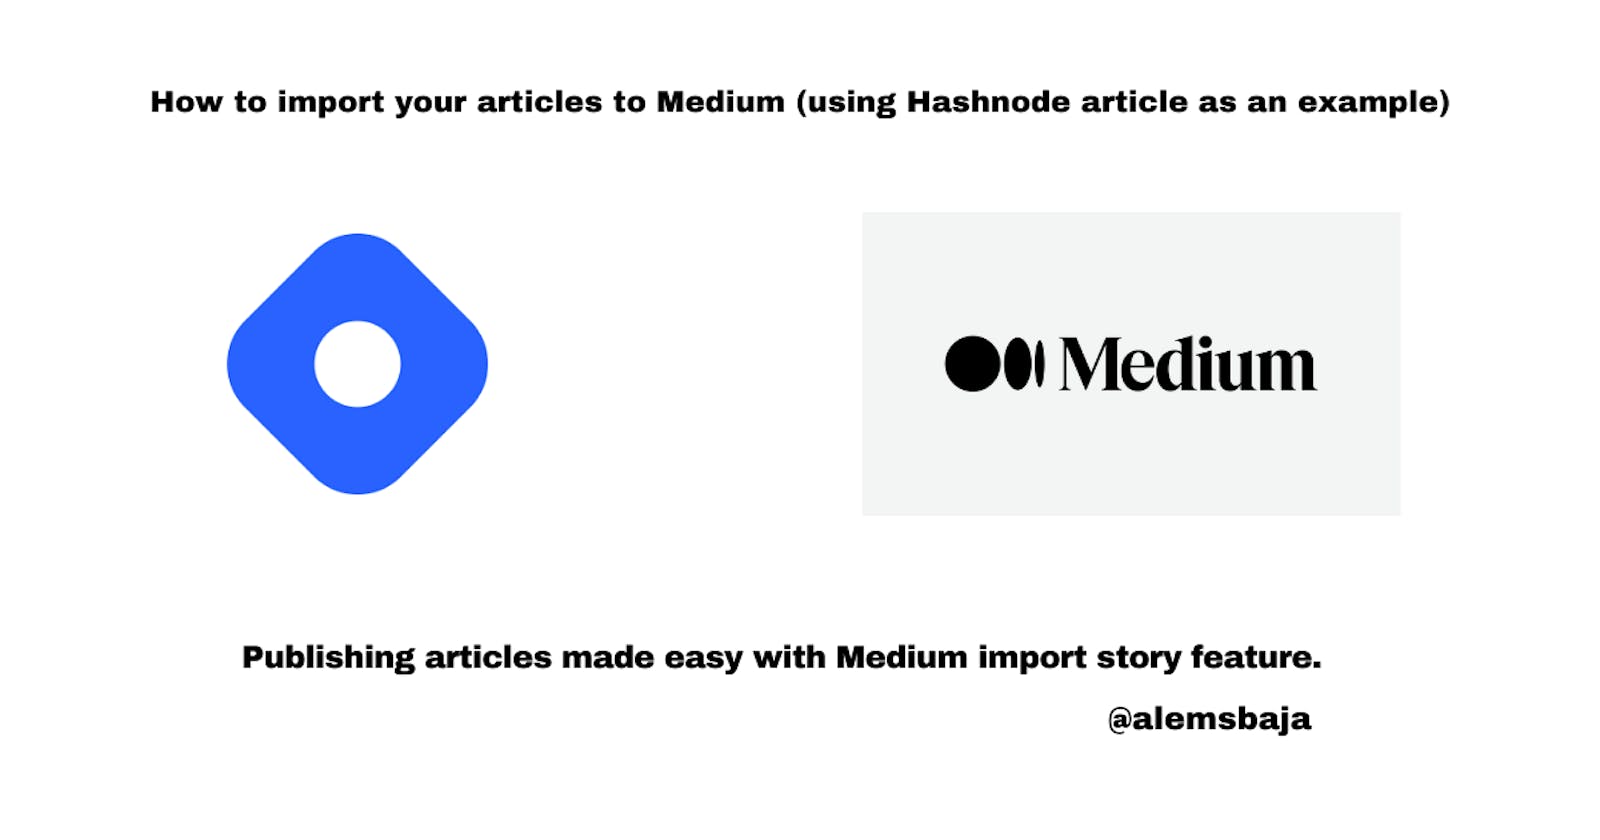 How to import your articles to Medium (using Hashnode article as an example)